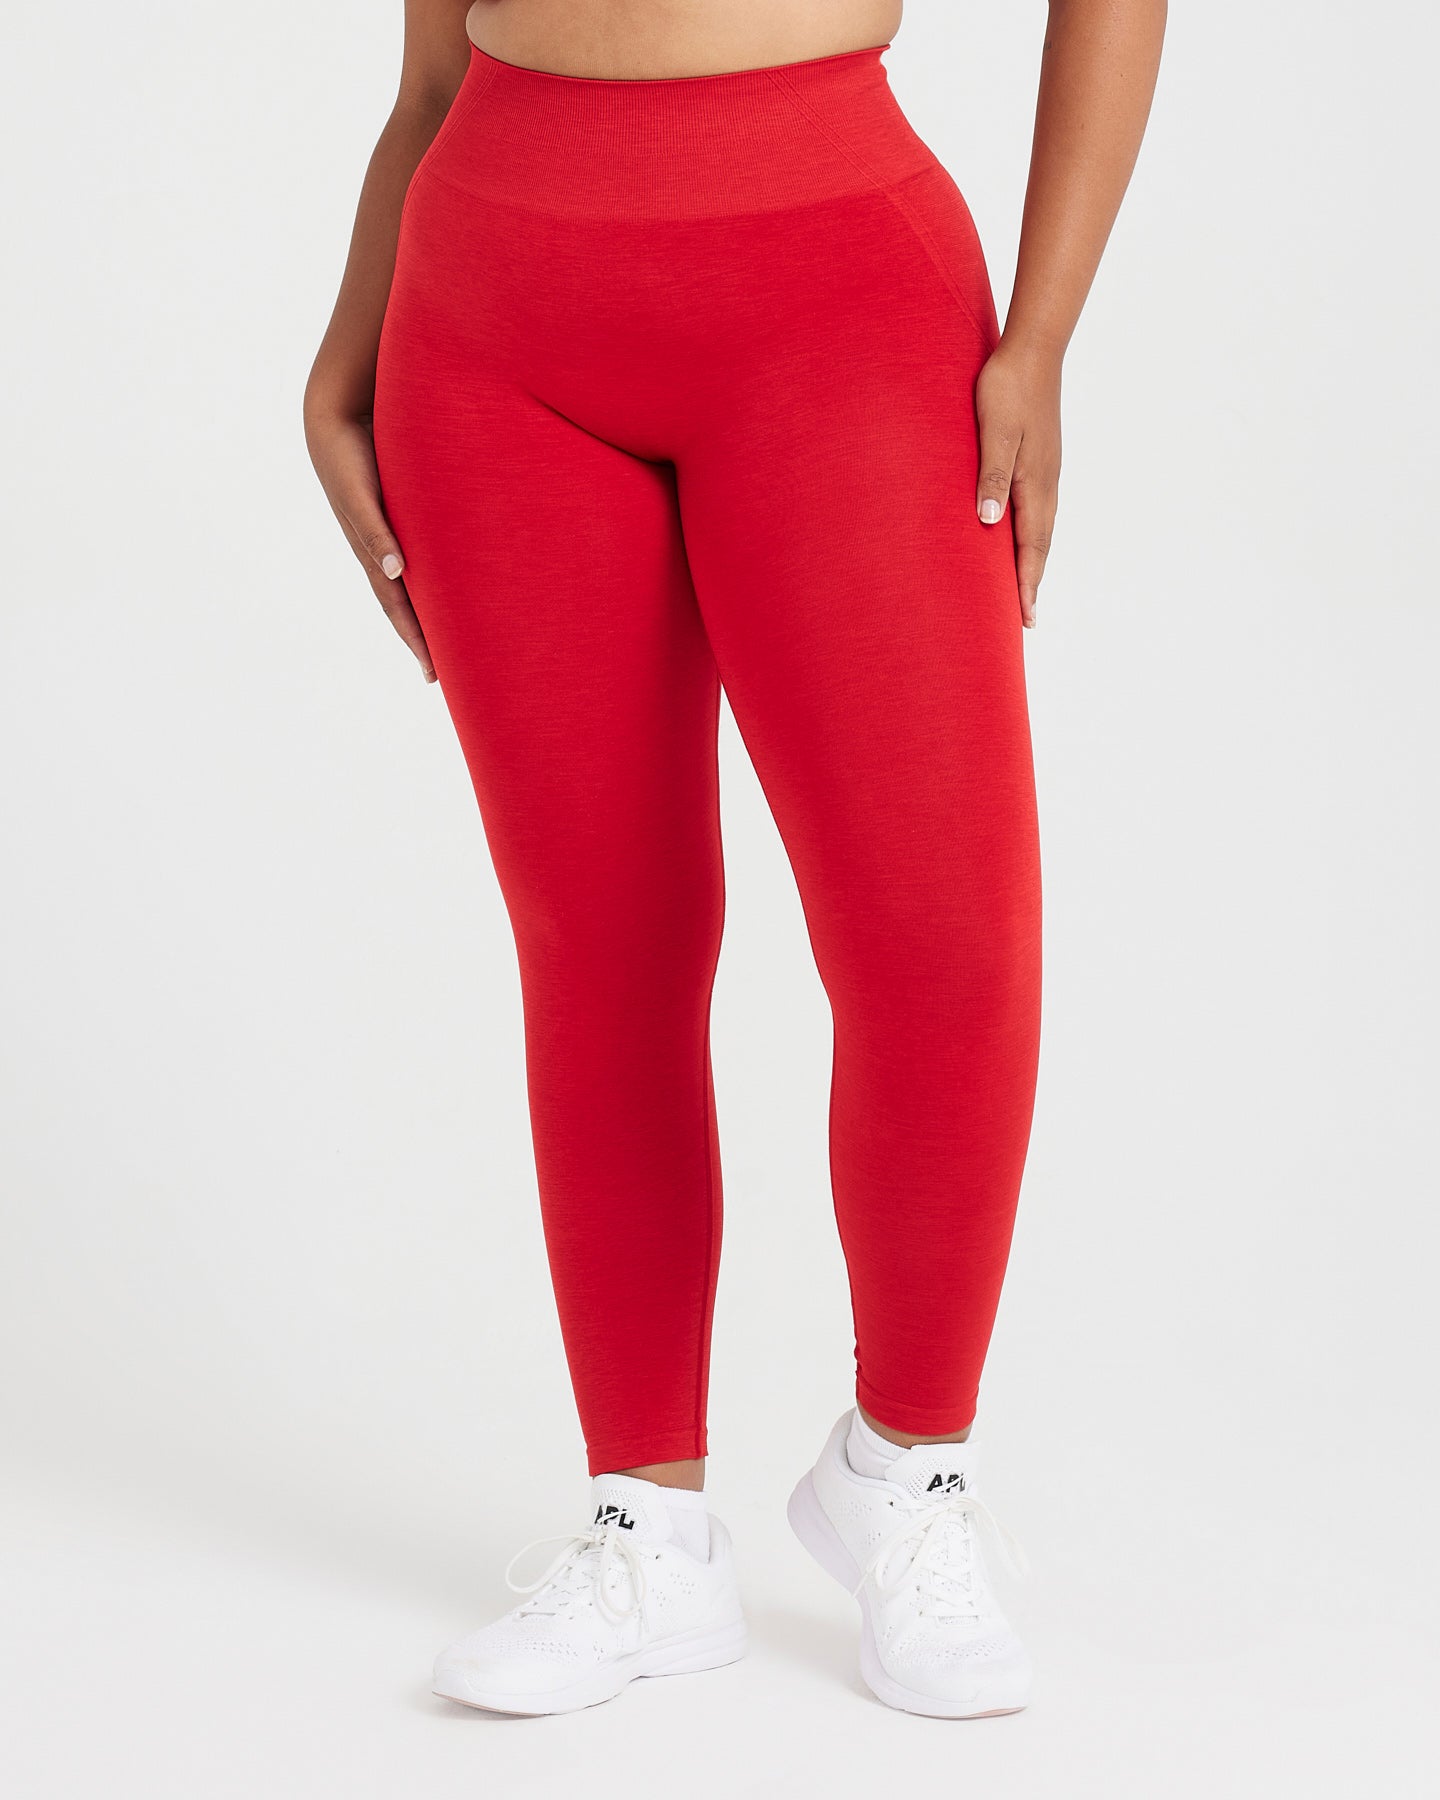 Twill Active Seamless Marl Laser Cut Leggings in Red